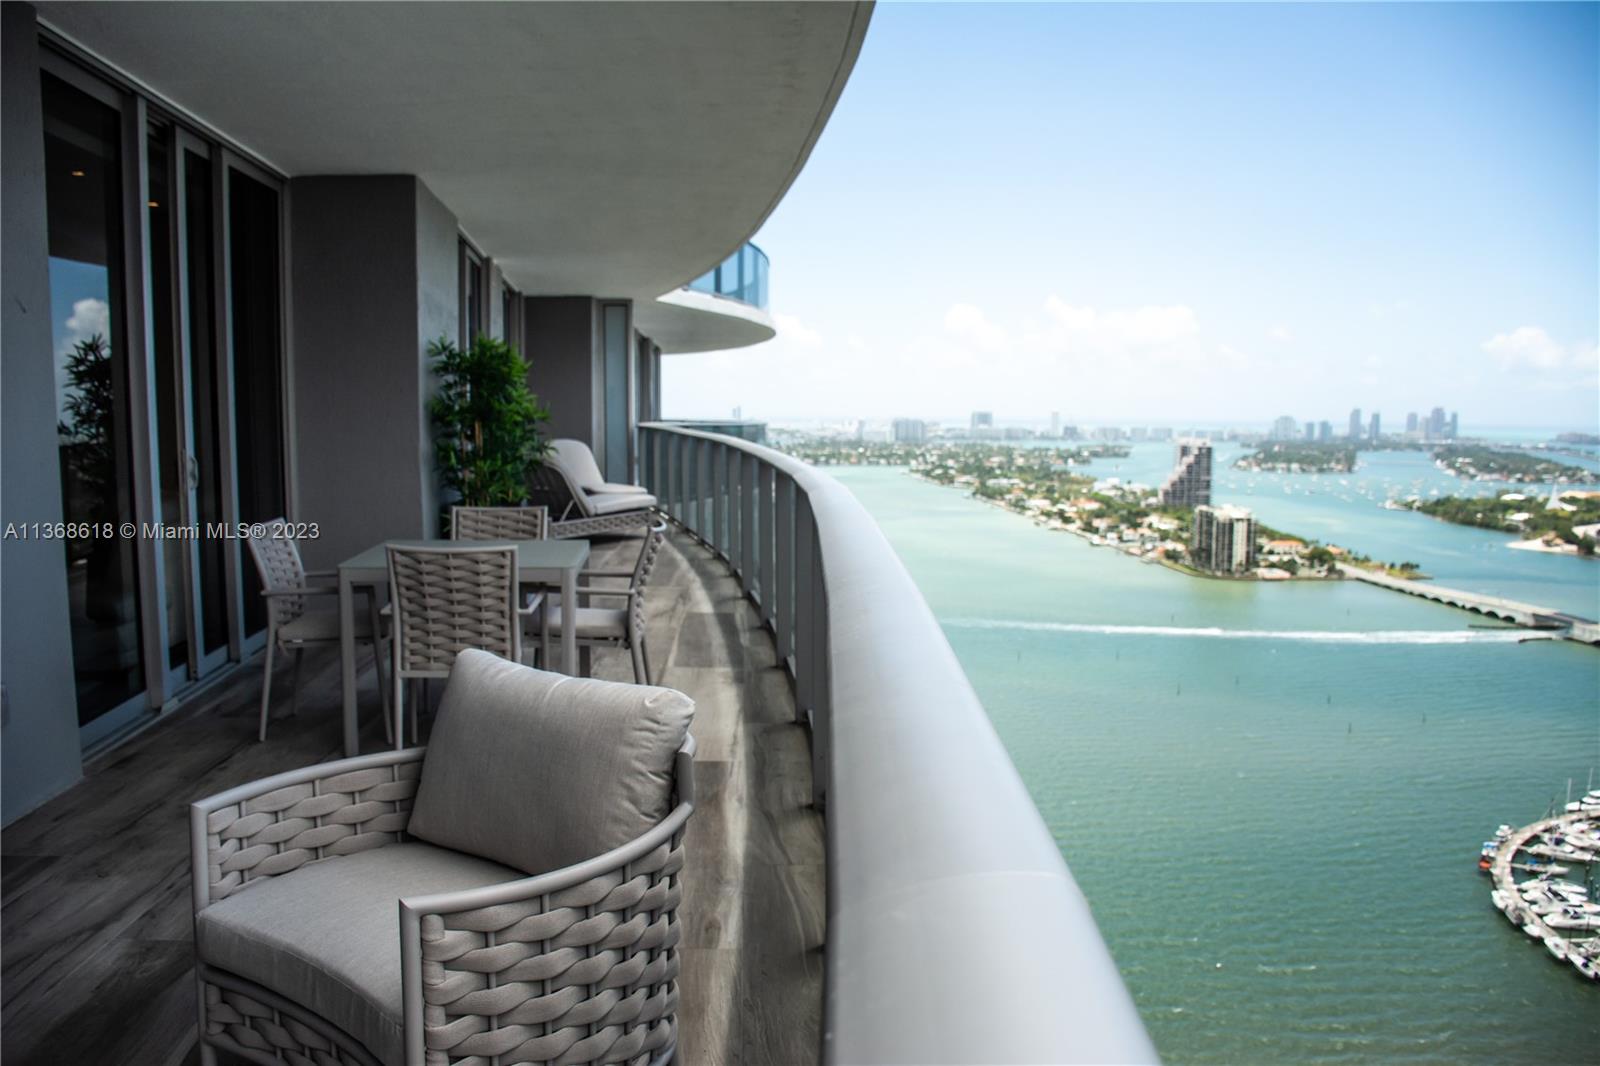 BRIGHT AND SPACIOUS 3BED/3.5 BATH UNIT AT ARIA ON THE BAY. HUGE BALCONY. UNOBSTRUCTED VIEWS OF THE BAY, SKYLINE, AND MIAMI BEACH. LUXURY FURNISHED AND DECORATED. TWO (2) ASSIGNED PARKING SPACE. 24 HRS SERVICES. RECENTLY BUILT IN 2018 RIGHT IN FRONT OF MARGARET PEACE PARK. CLOSE TO EVERYTHING. MINUTES AWAY FROM MIAMI DESIGN DISTRICT, WYNWOOD, MIAMI BEACH, ARTS AND ENTERTAINMENTS AND MUCH MORE. INSTRUCTIONS AT BROKERS REMARKS.